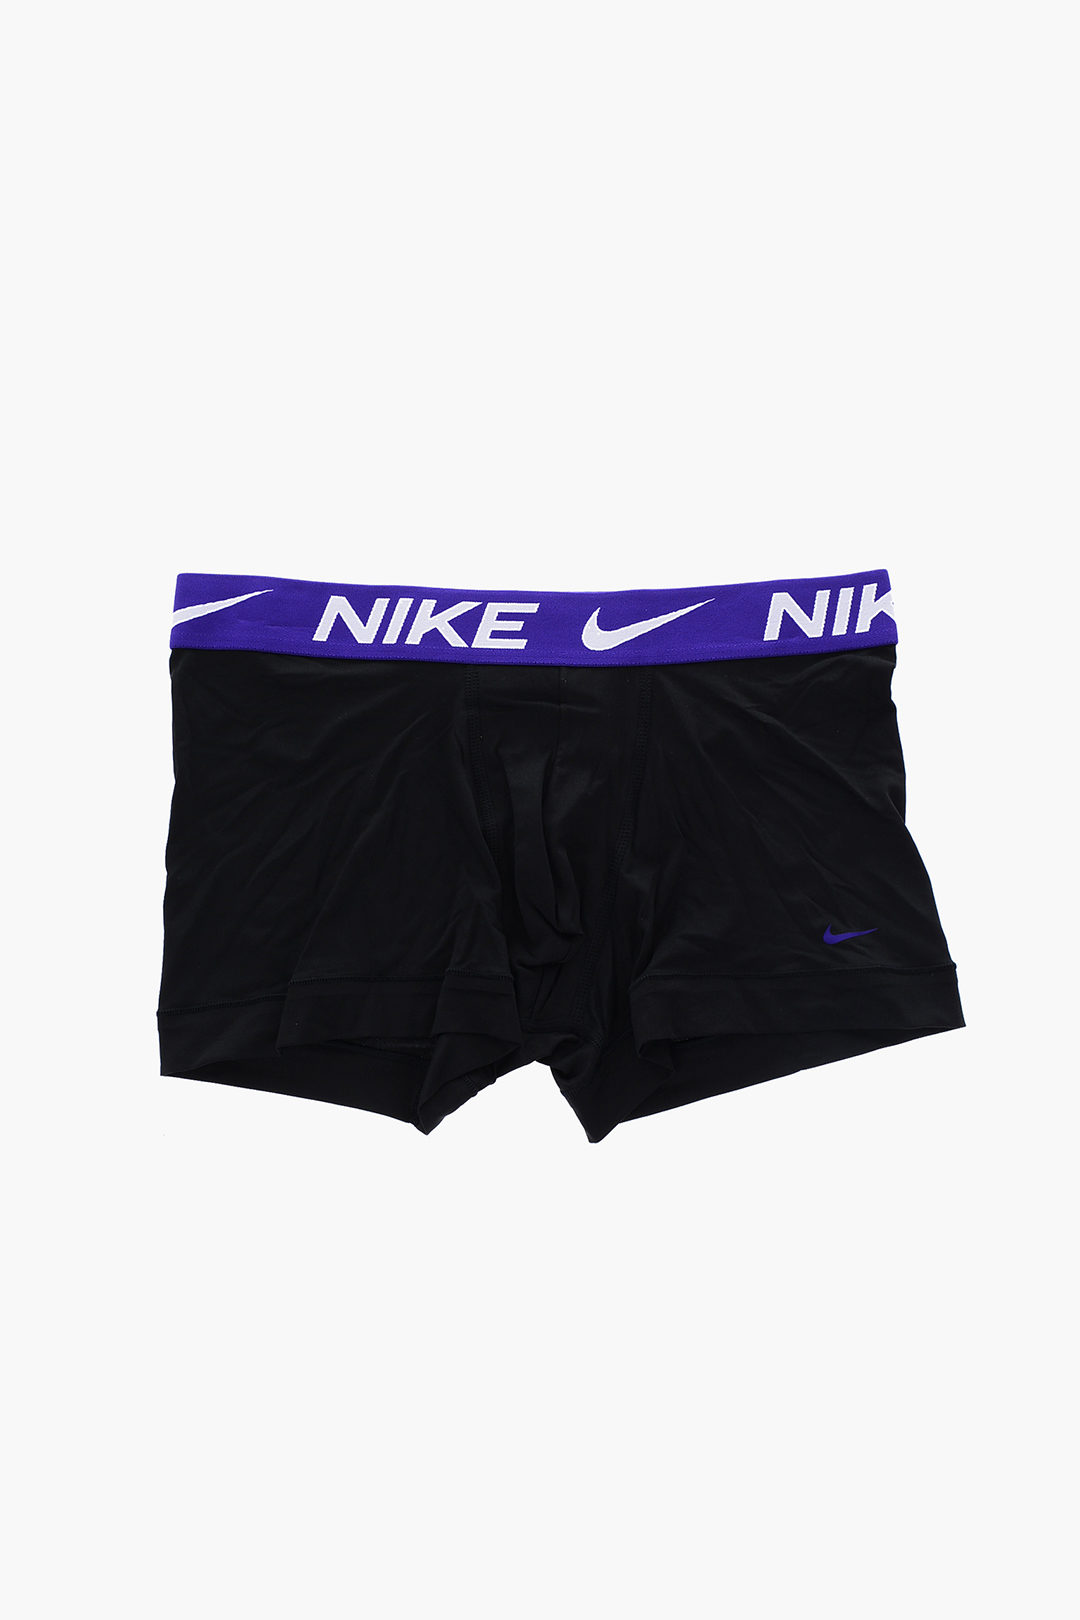 Nike Set of 3 Dri-Fit Briefs with Logoed Elastic Band men - Glamood Outlet